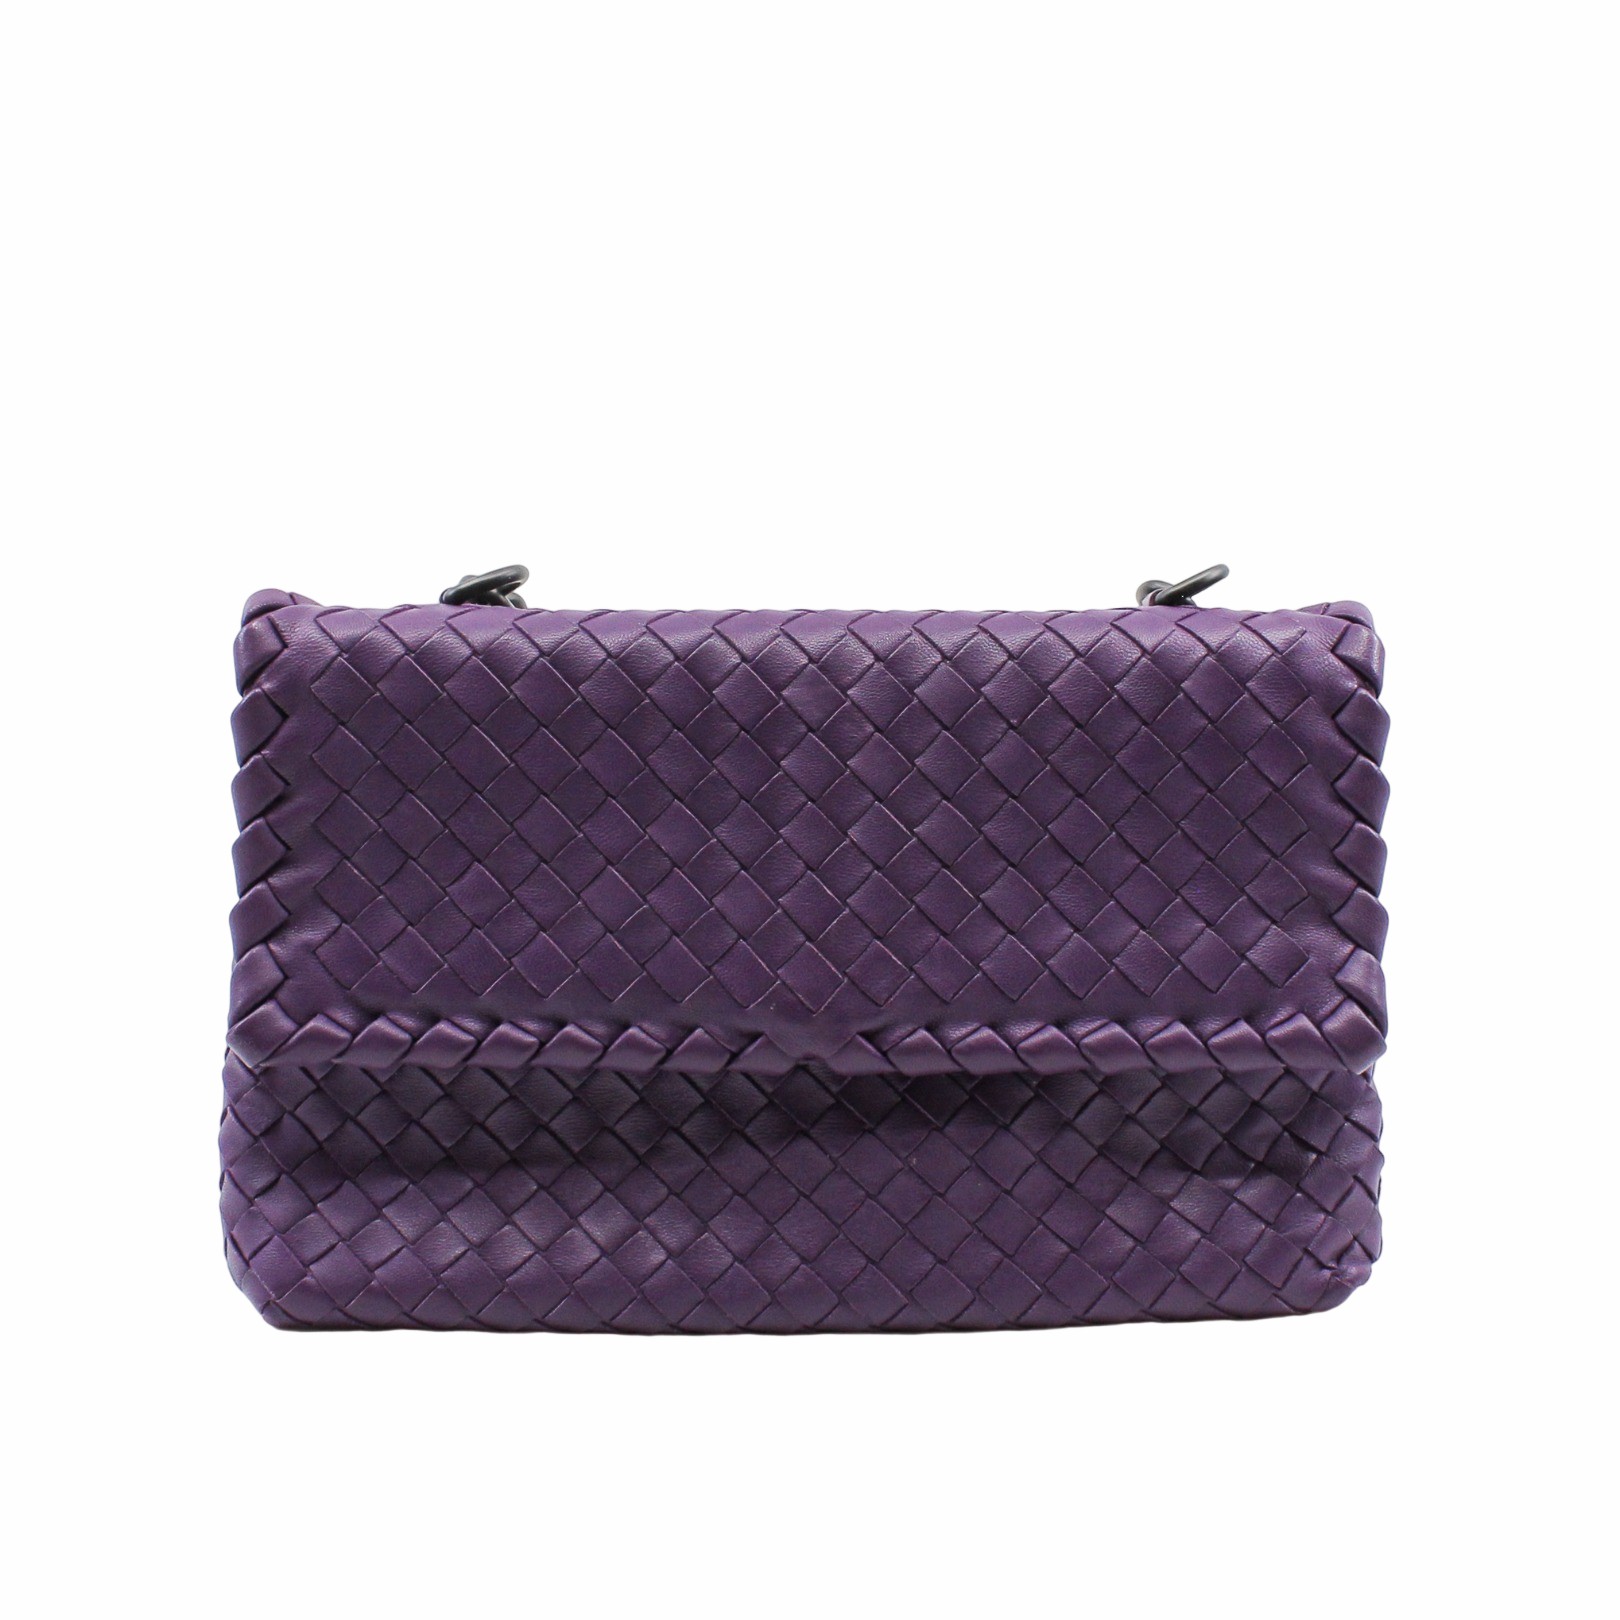 NWT 100% AUTH Chanel 12P Purple Patent Leather Flap Clutch Bag W/Chain